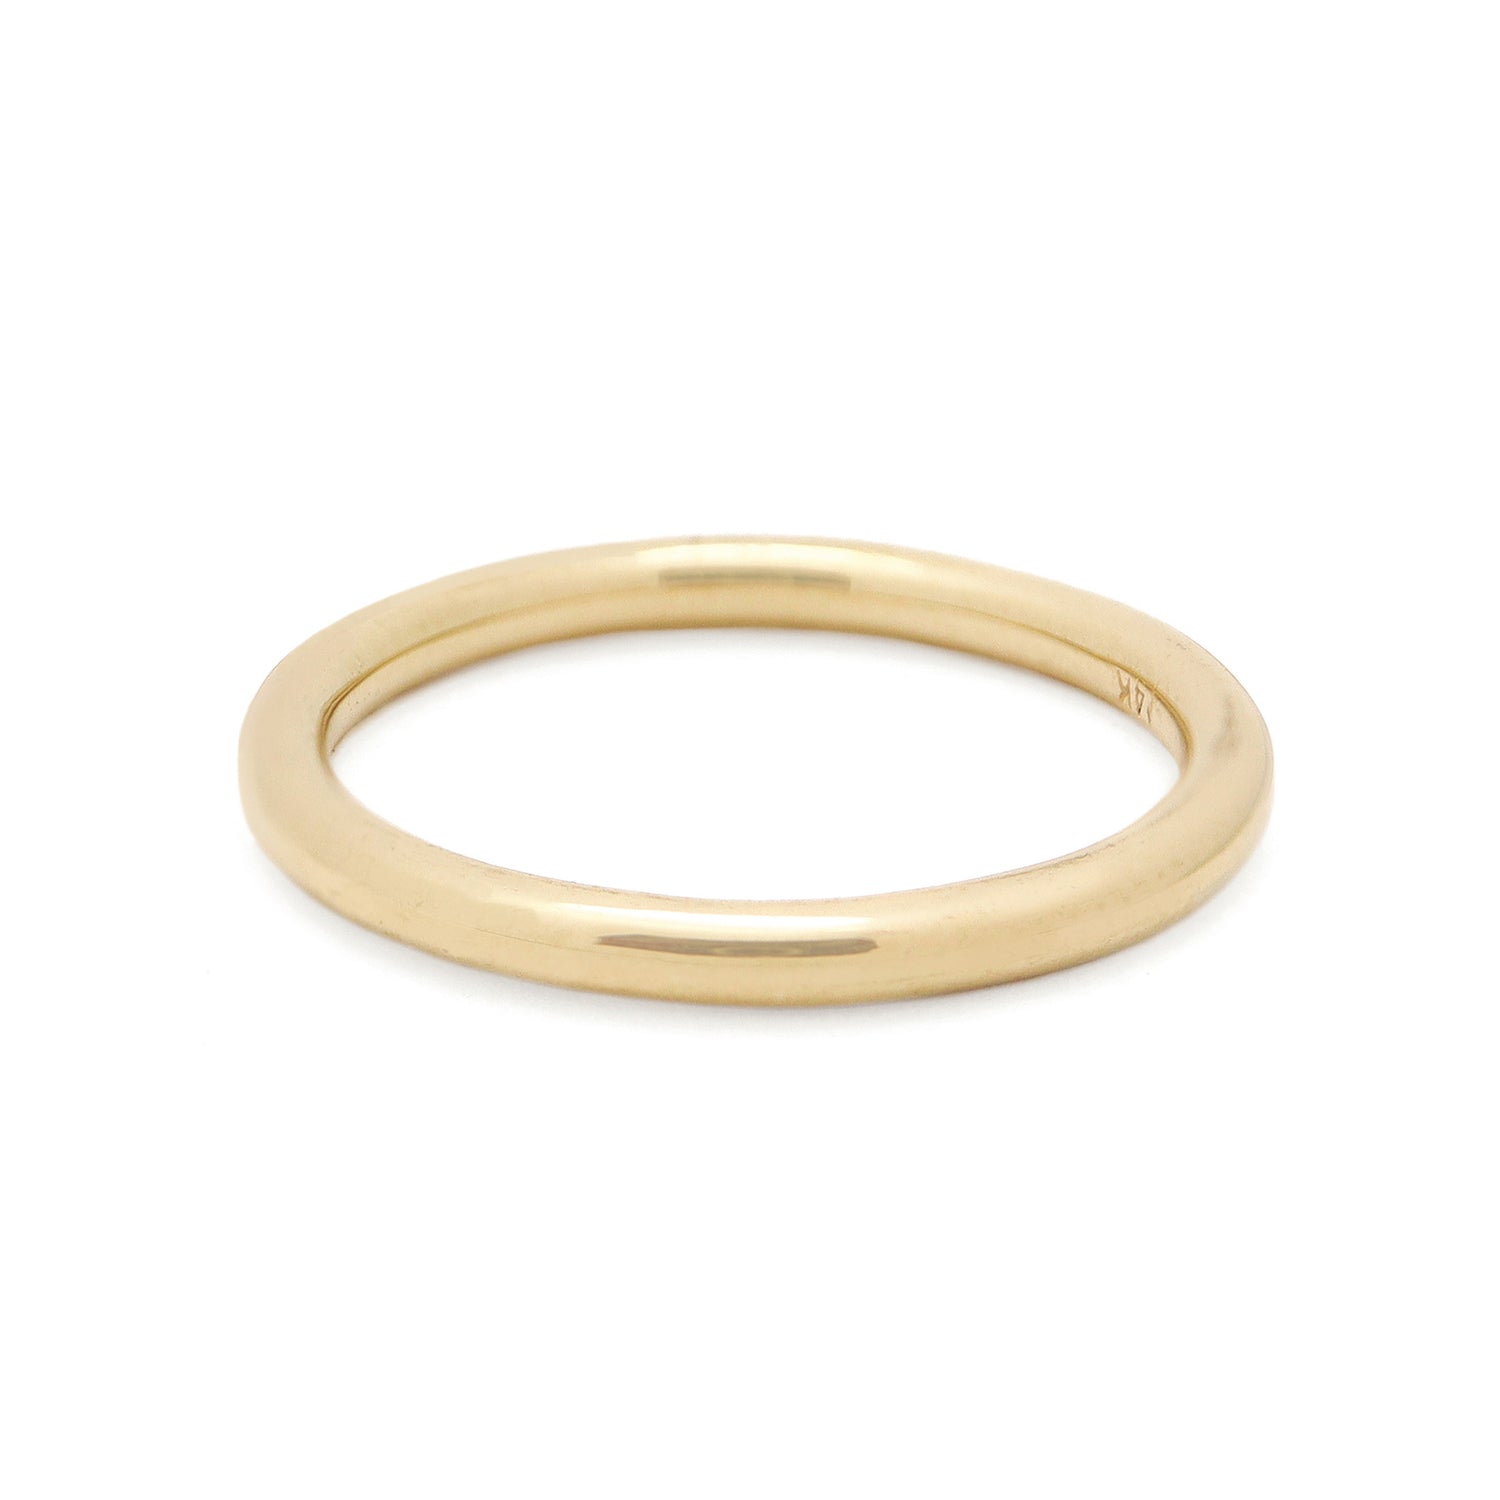 Rounded Band Ring Gold Ring Gold Wedding Ring Gold Wedding Band Erica Leal Jewellery Erica Leal Jewelry Vancouver Jeweler Vancouver Jeweller Handmade Ring Handmade jewellery 